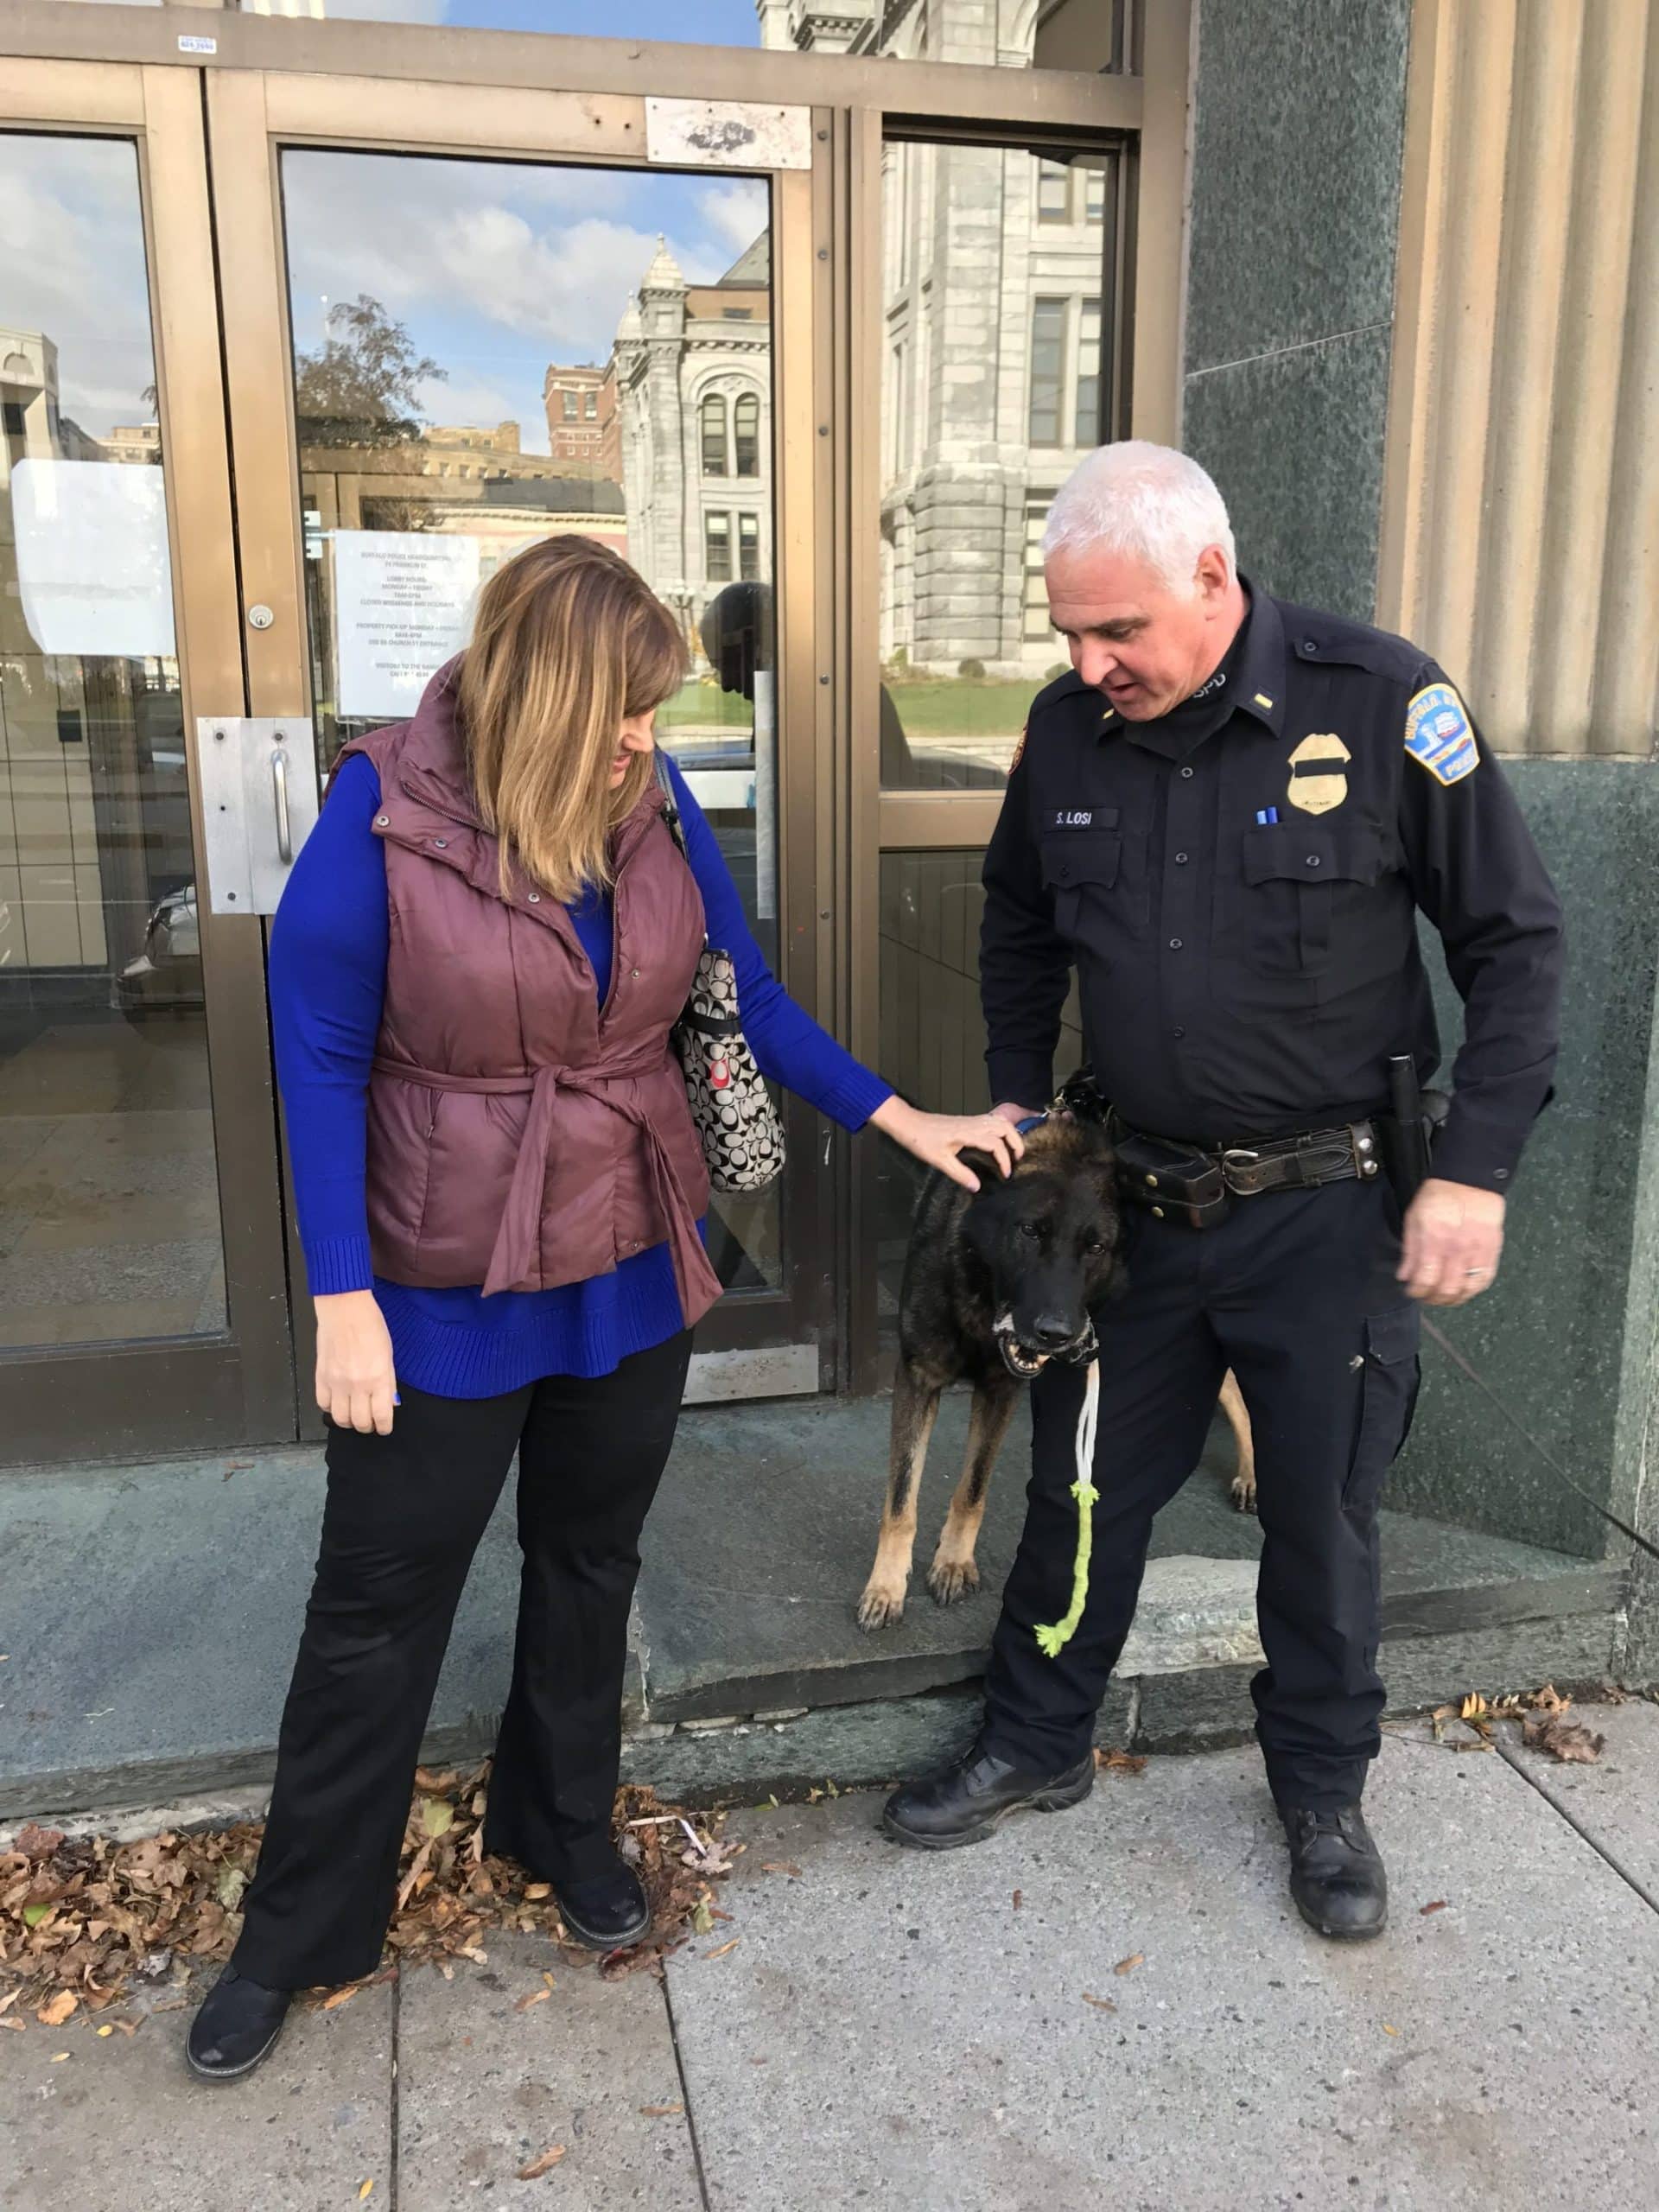 I spent some time with K9 Officer Shield and here’s what I learned about how he’s doing – and what’s next!